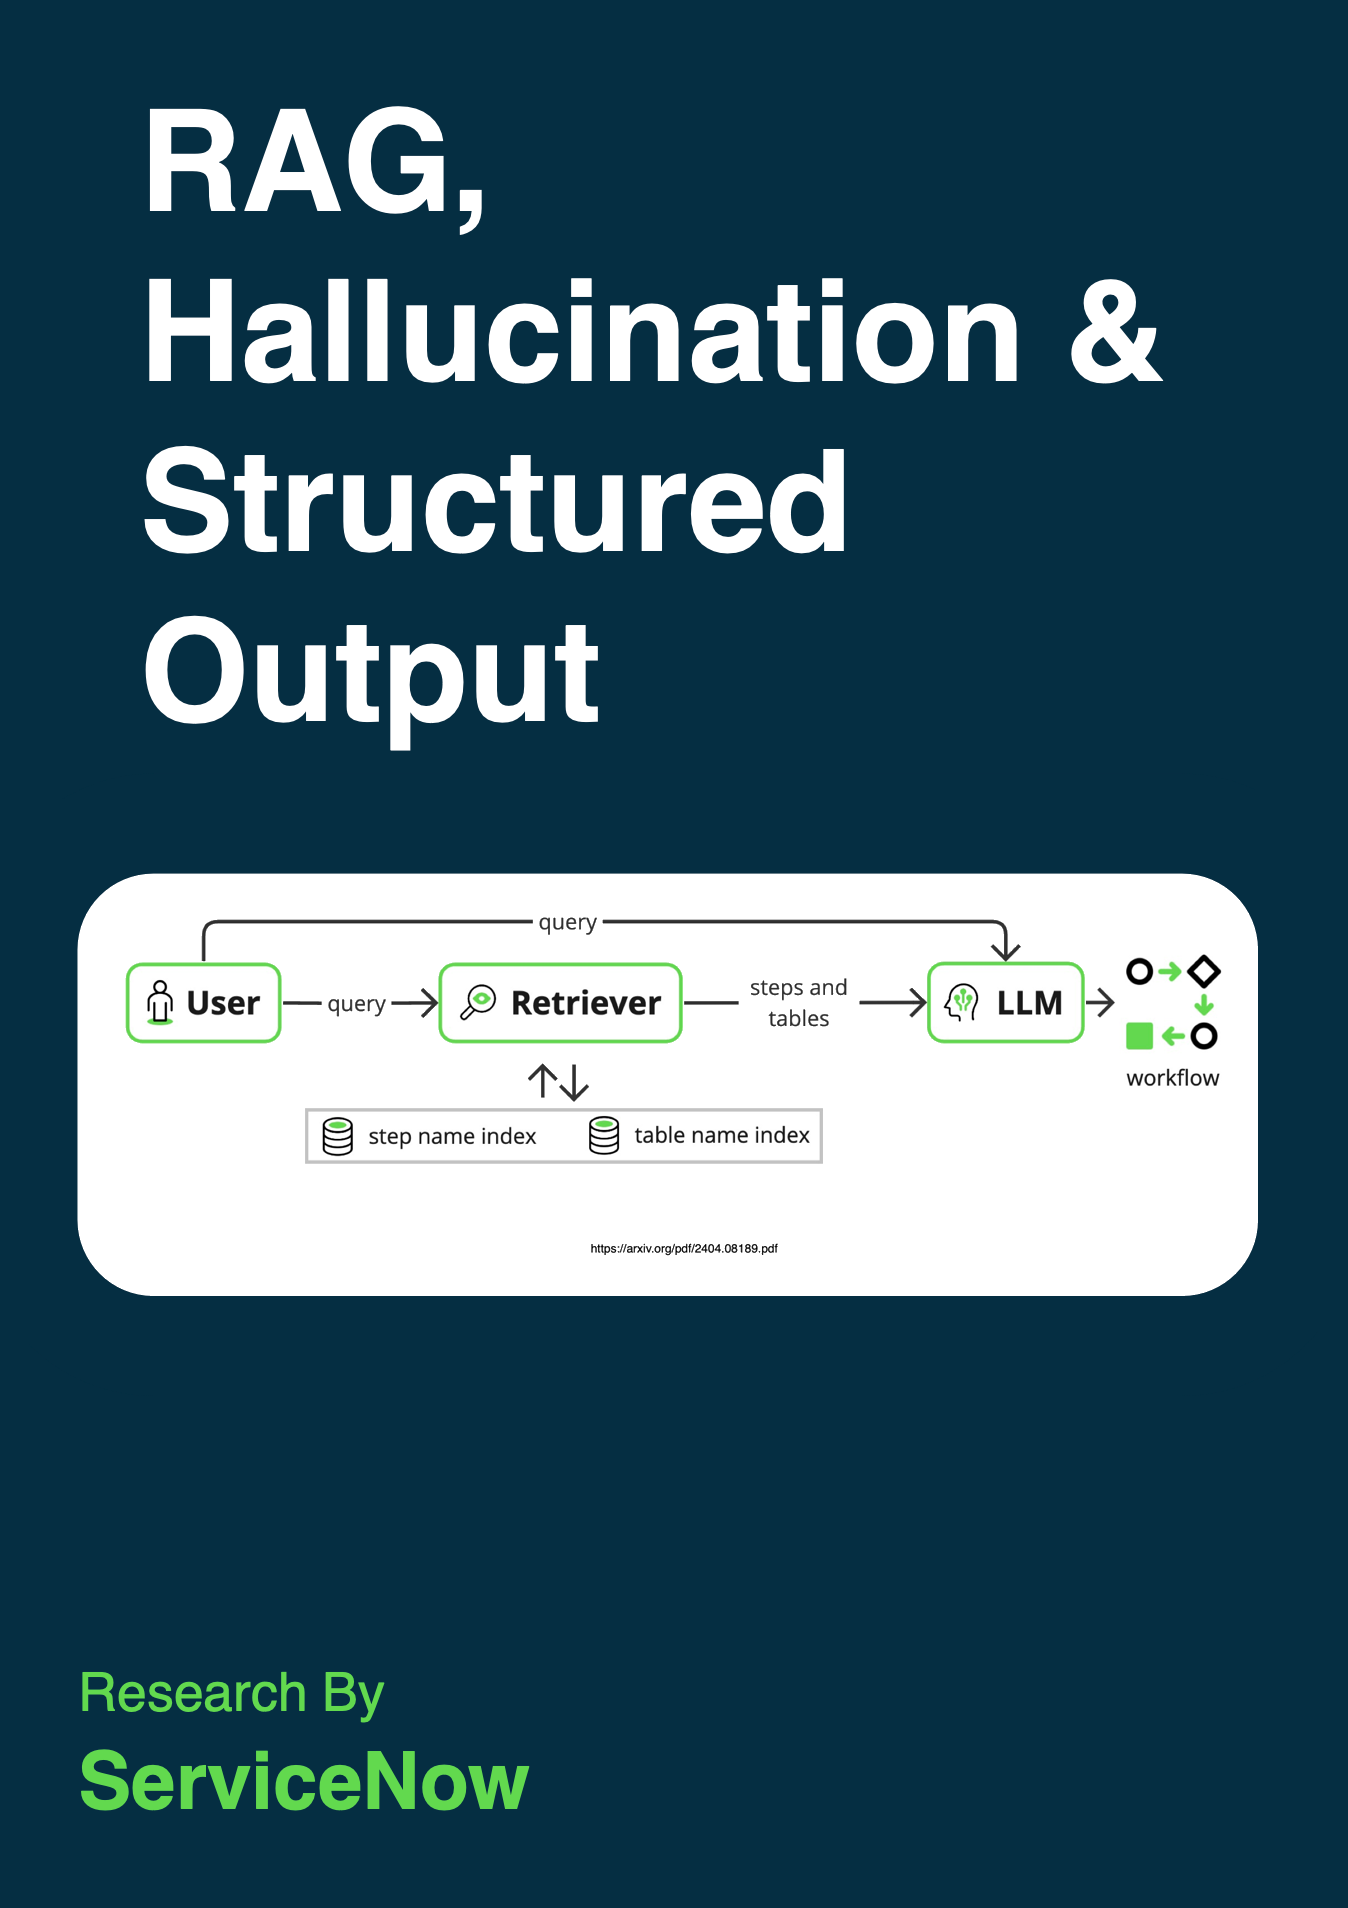 RAG, Hallucination & Structure: Research By ServiceNow